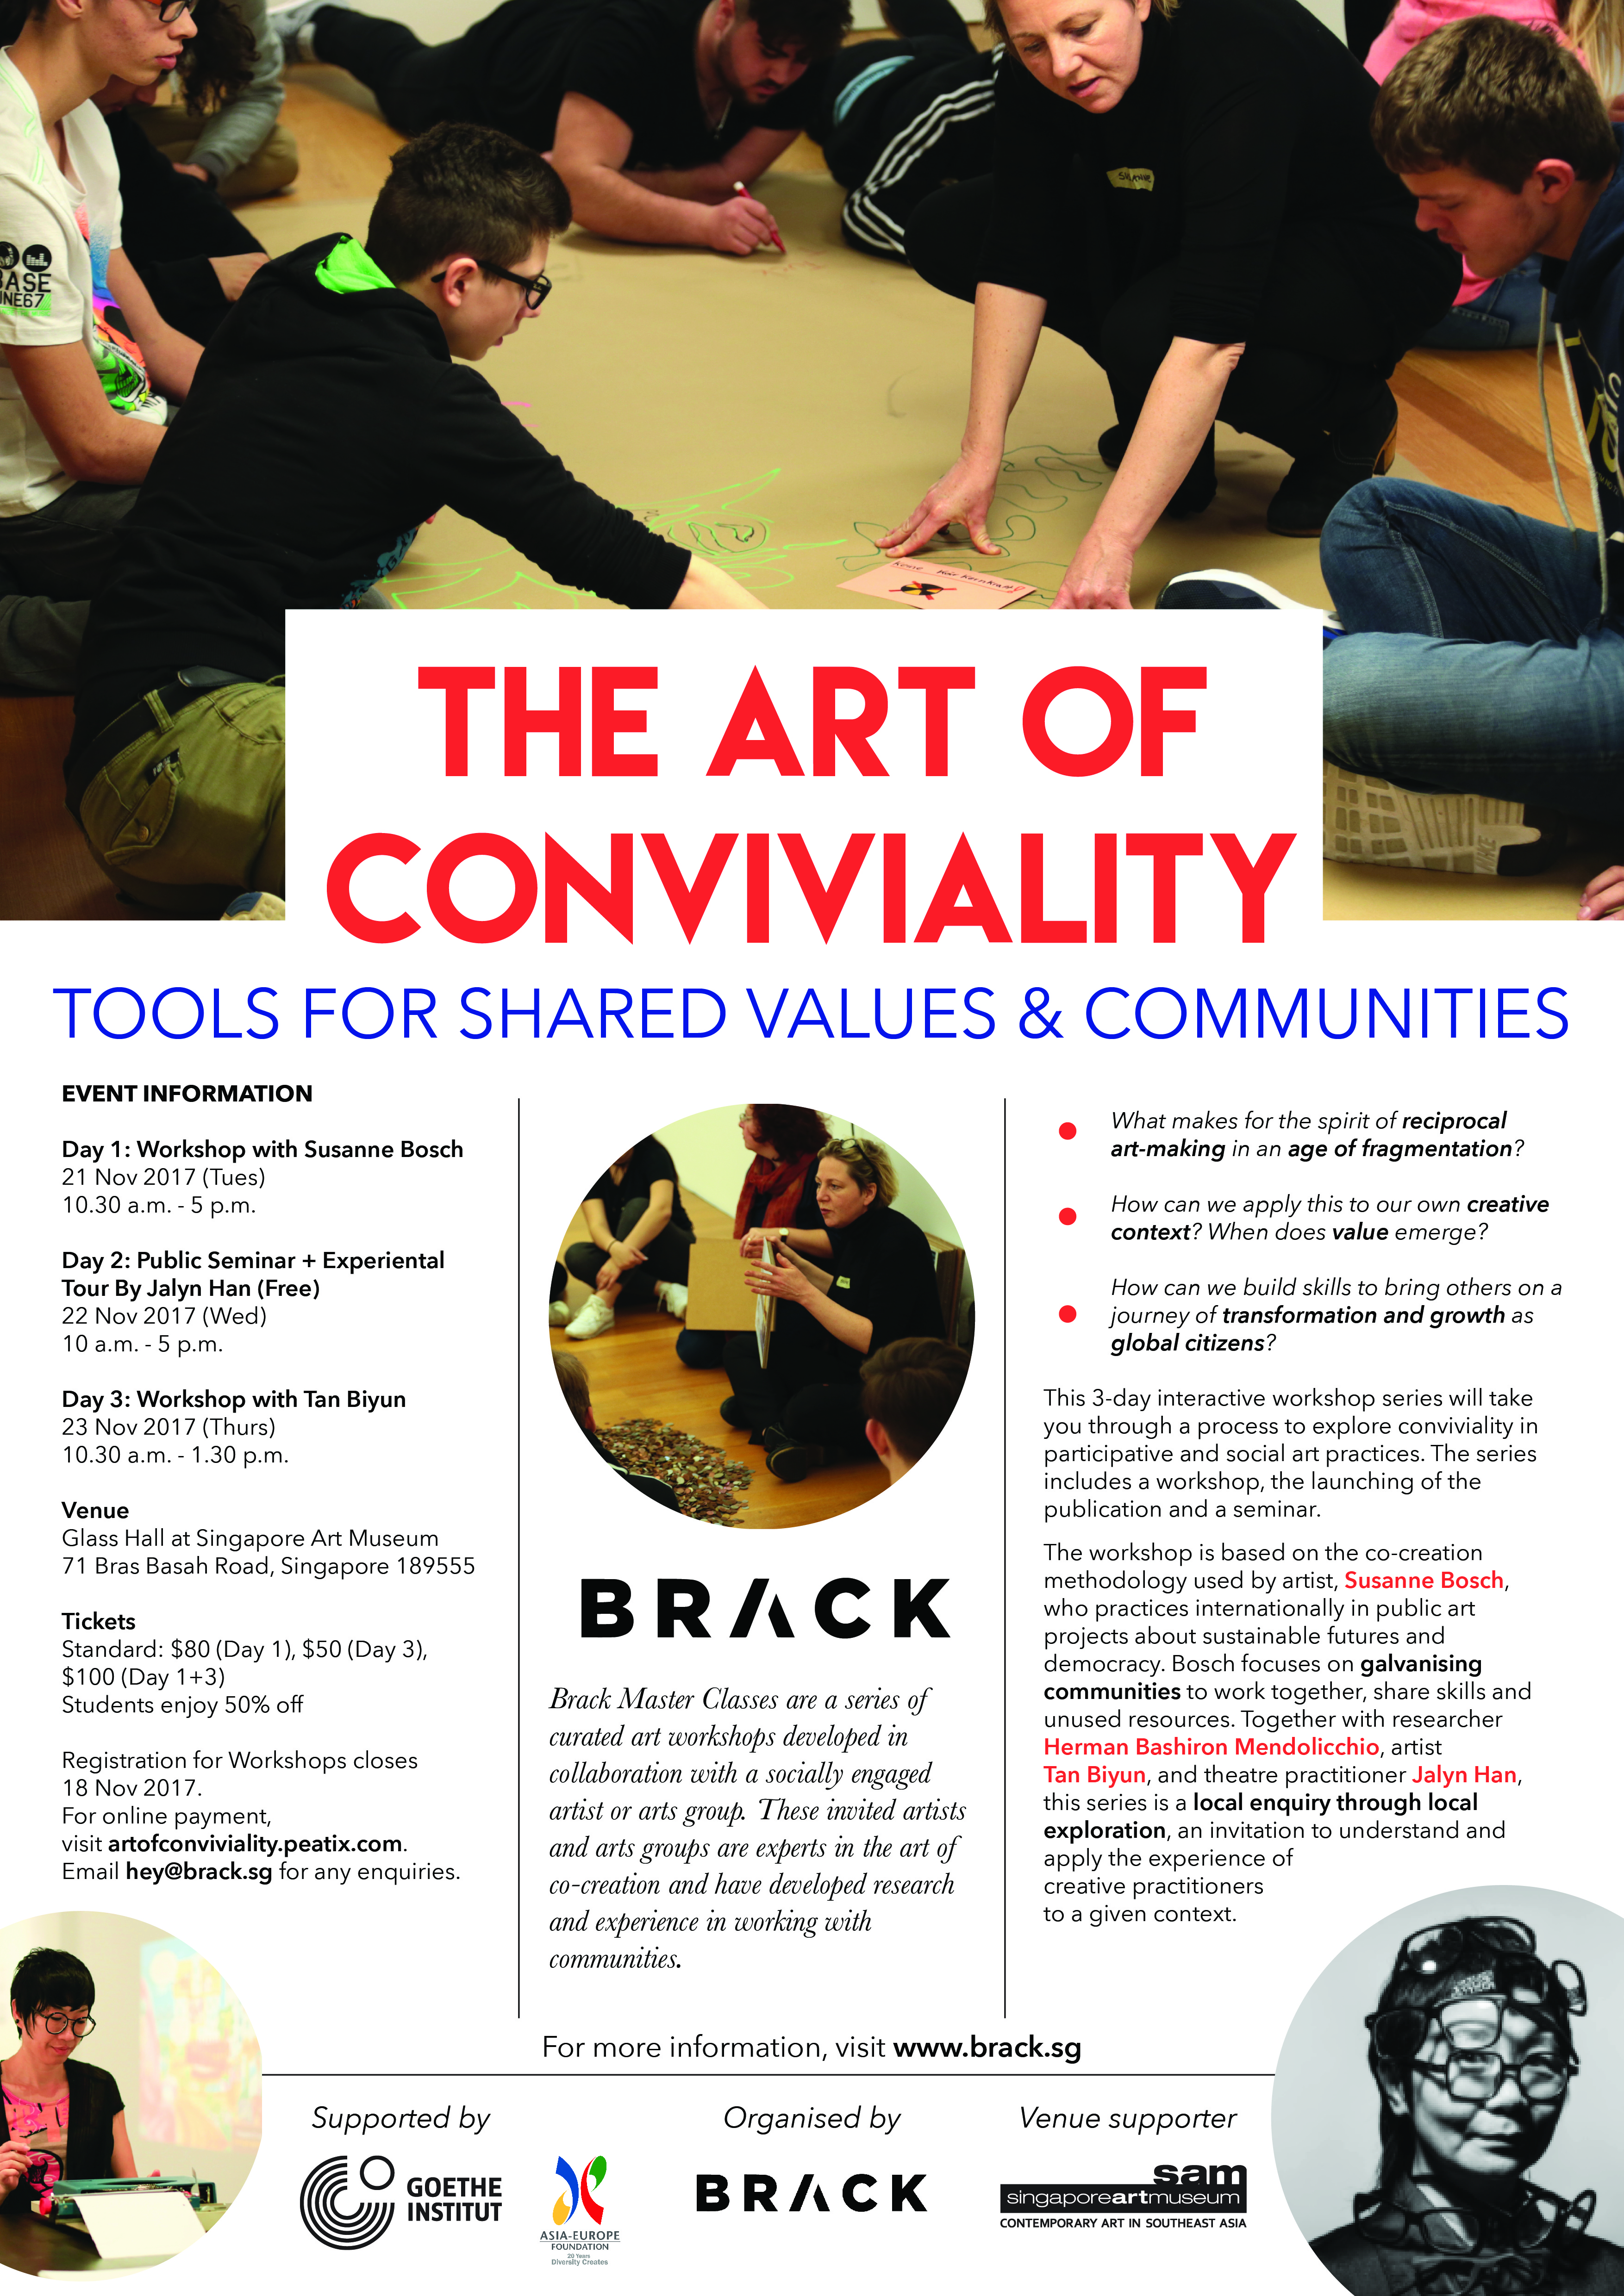 The Art of Conviviality 